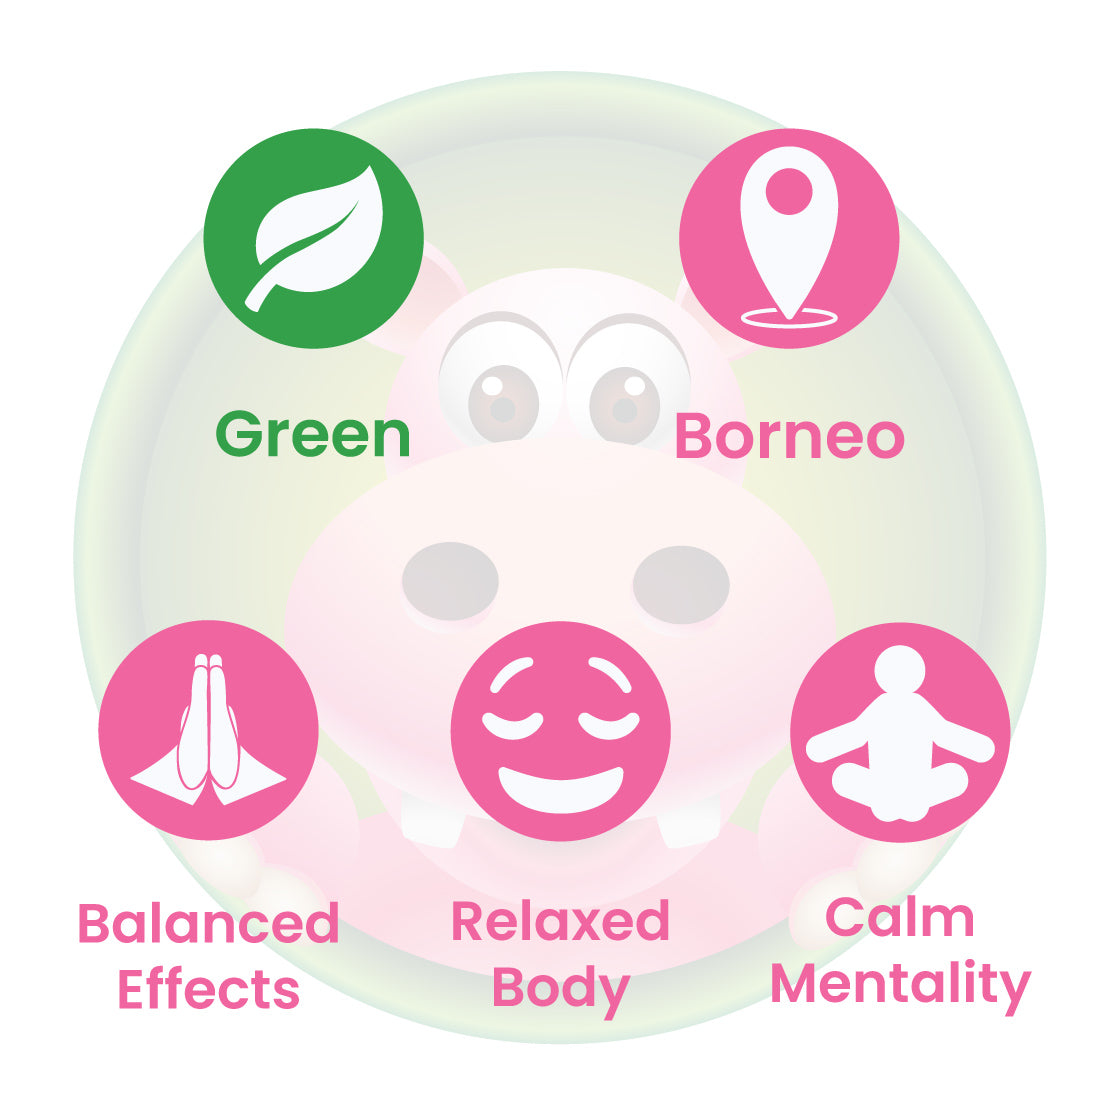 Infographic Details for Happy Hippo Green Vein Borneo Kratom Powder. Leaf color: Green Vein. Kratom Strain Origin: Borneo. Kratom Effects resonate with a balanced effects, relaxed body, and calm mentality.